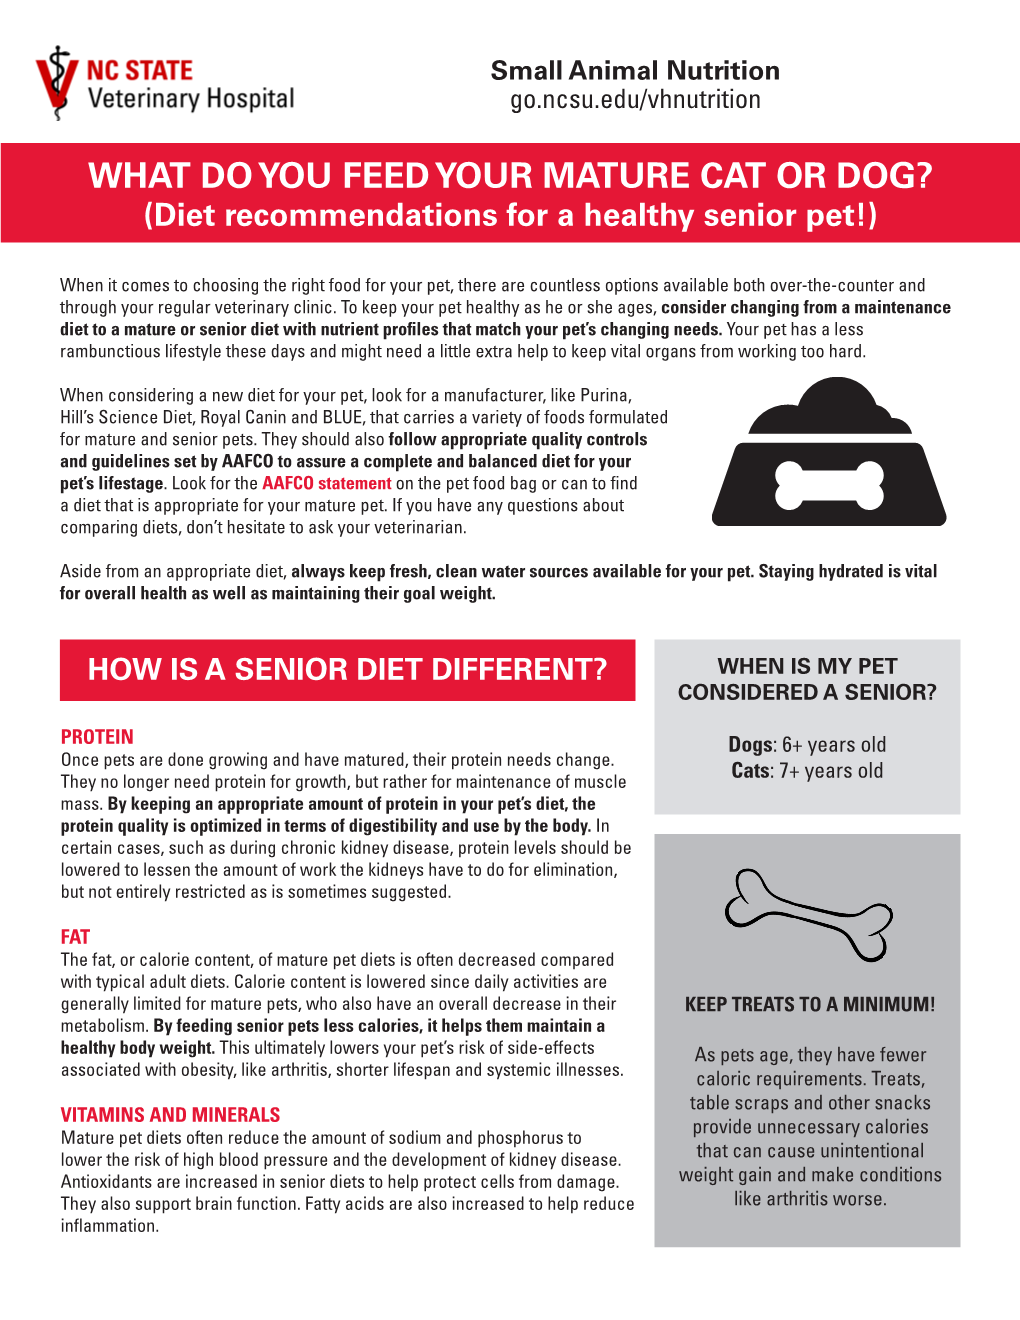 WHAT DO YOU FEED YOUR MATURE CAT OR DOG? (Diet Recommendations for a Healthy Senior Pet!)